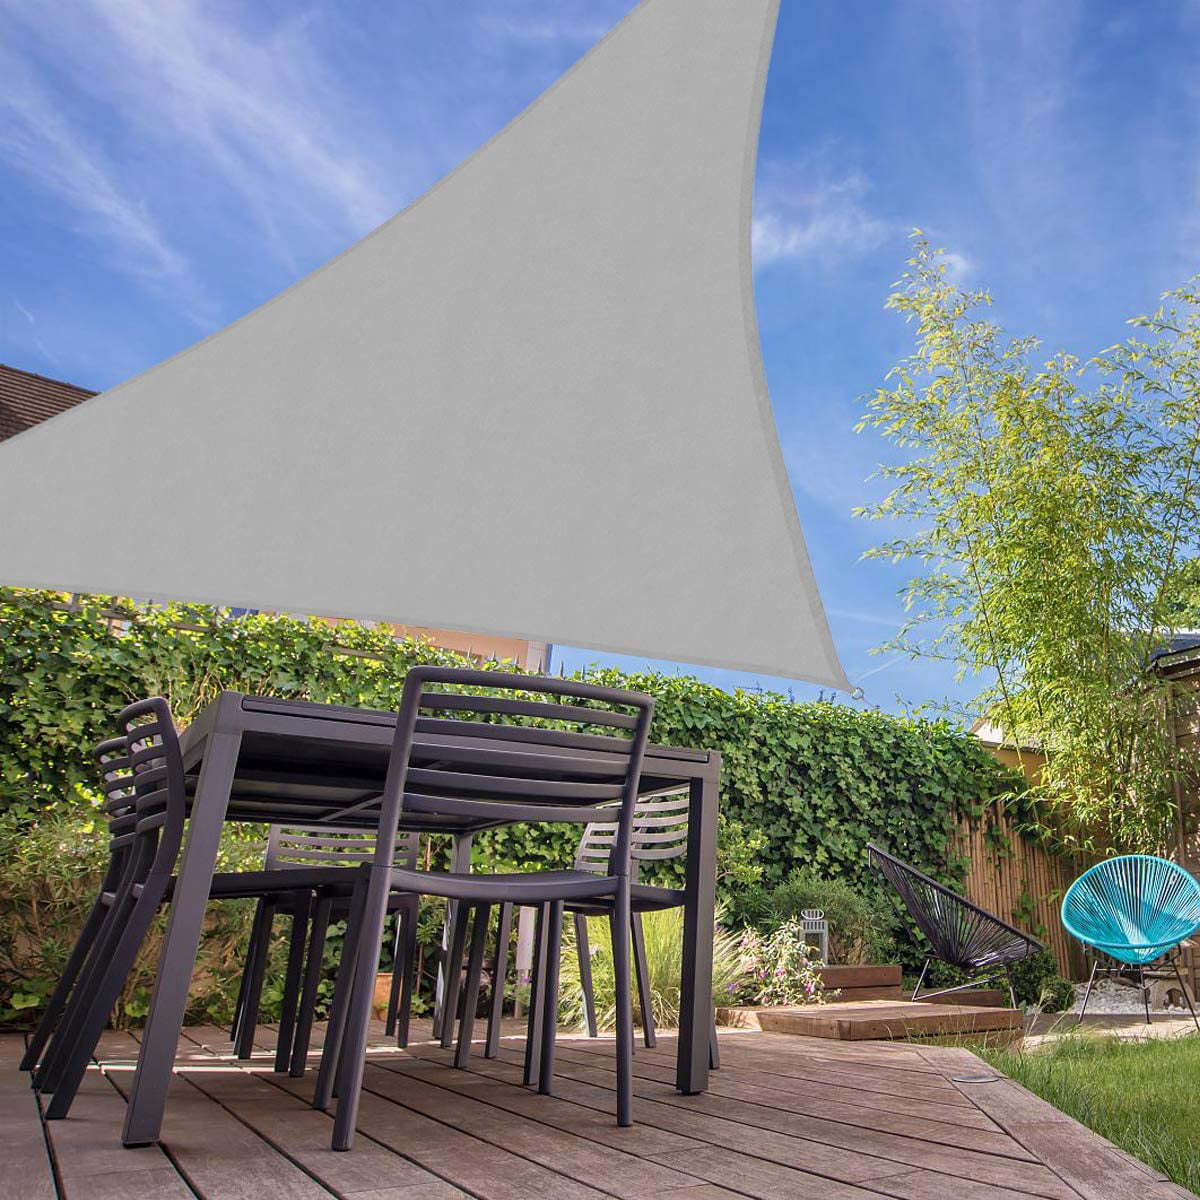 10 x 10 x 10 Turquoise Sun Shade Sail Triangle Canopy Awning Shelter Fabric 